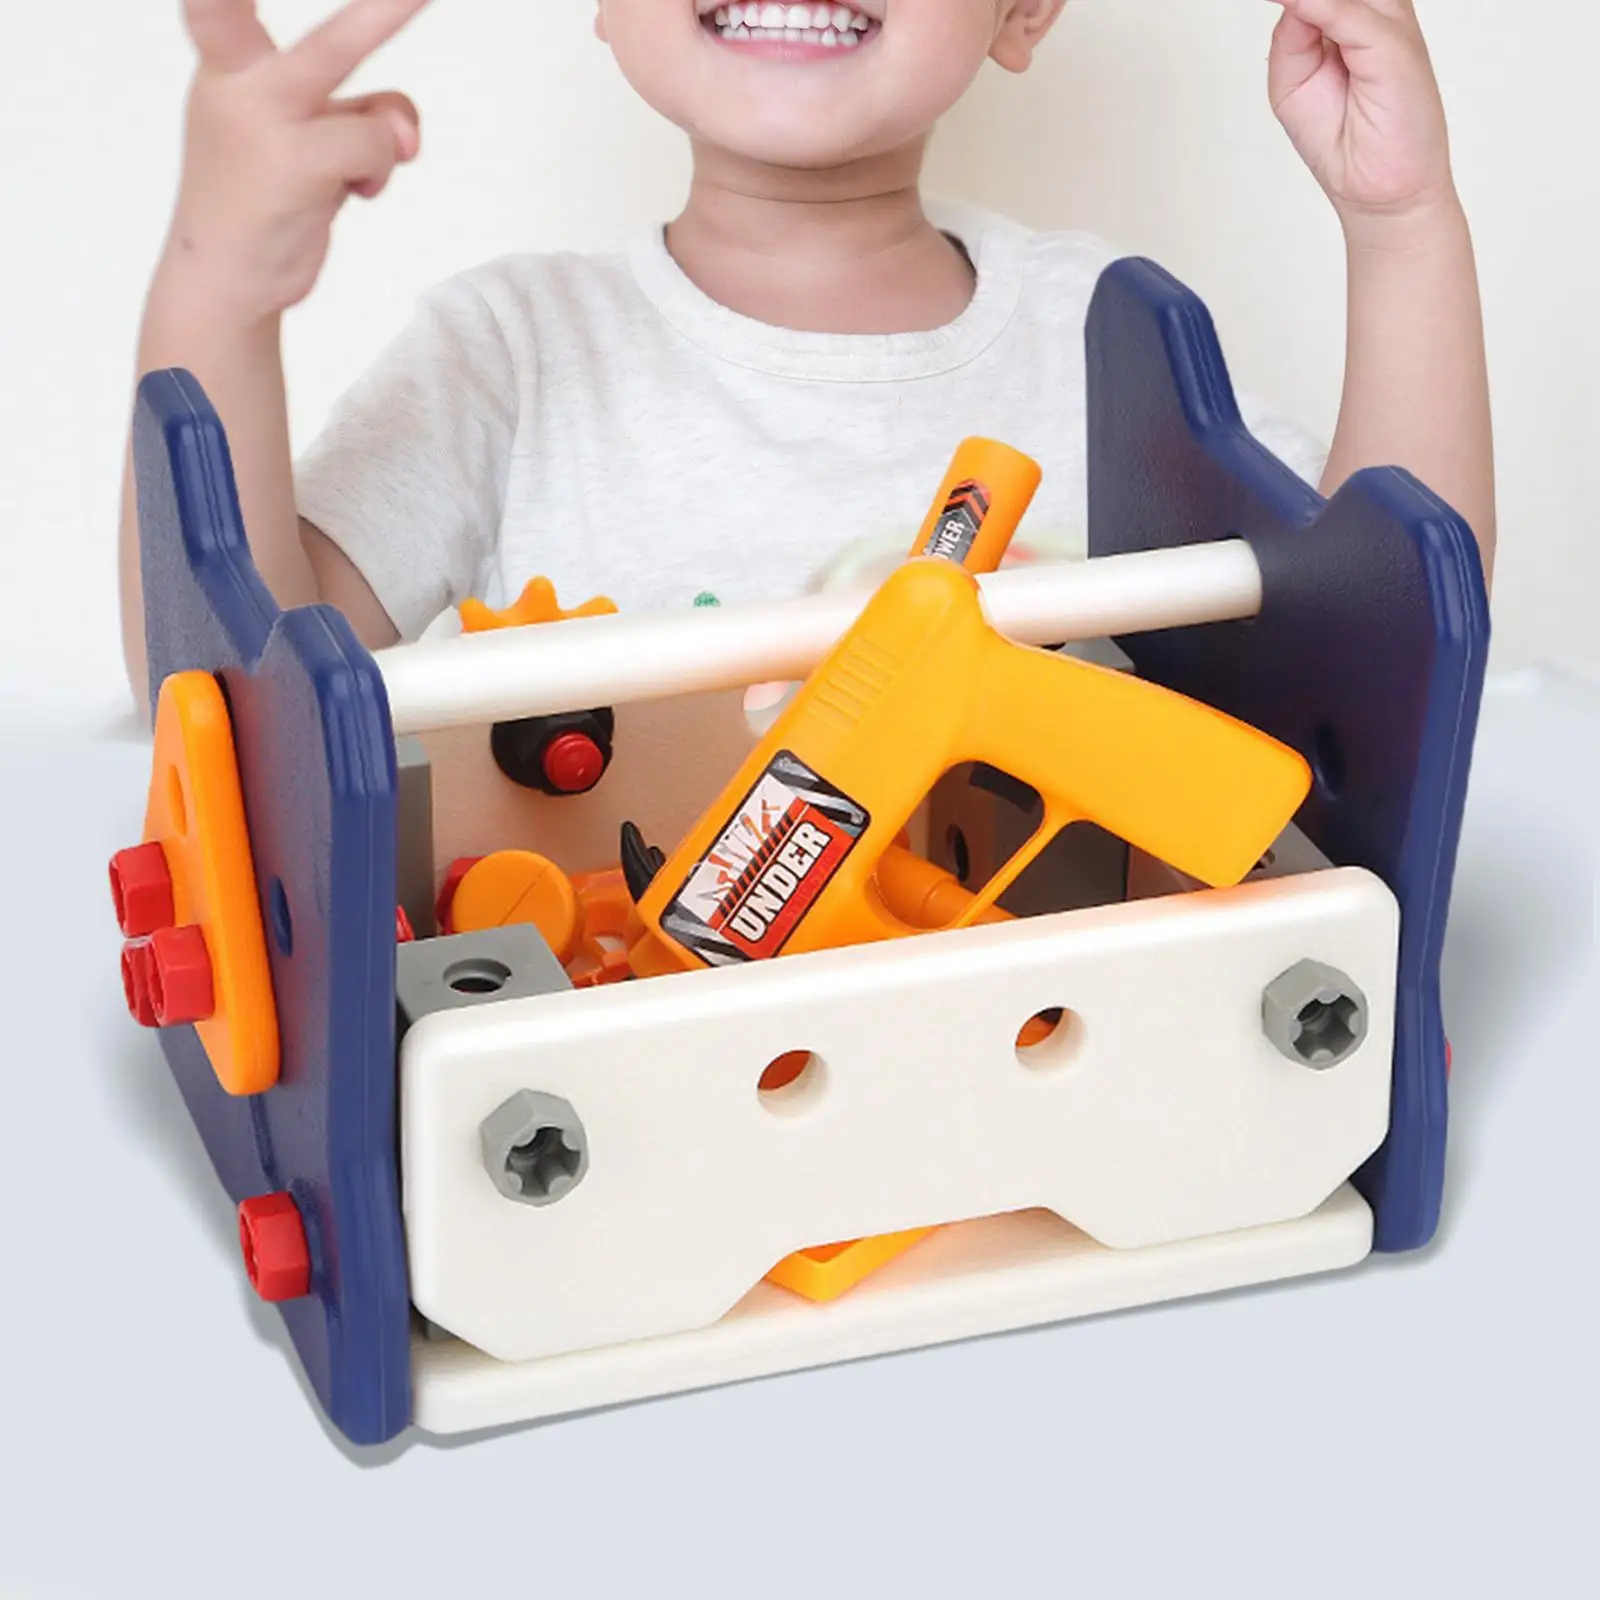 Toolbox Kids Toy Set Develops Fine Motor Skills for Ages 3+ Years Old Kids